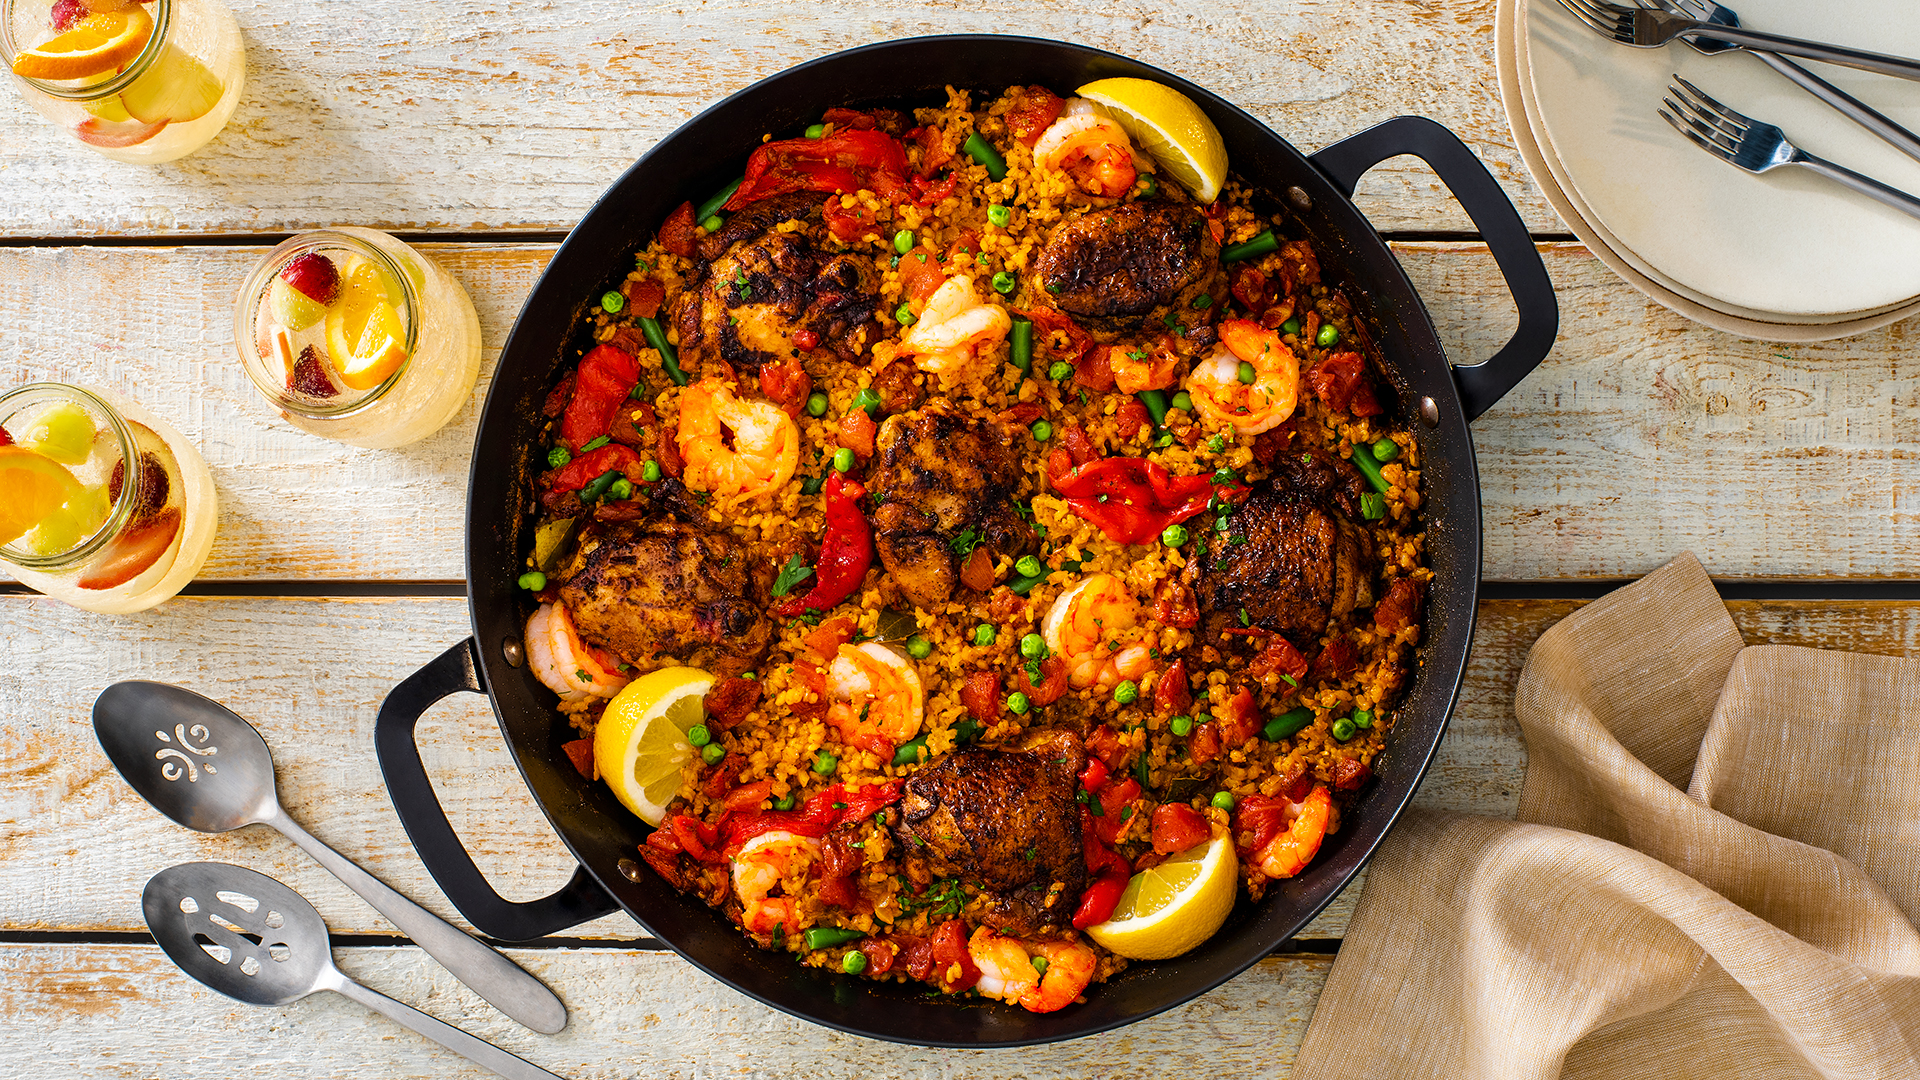 Grilled Paella with Chicken and Shrimp